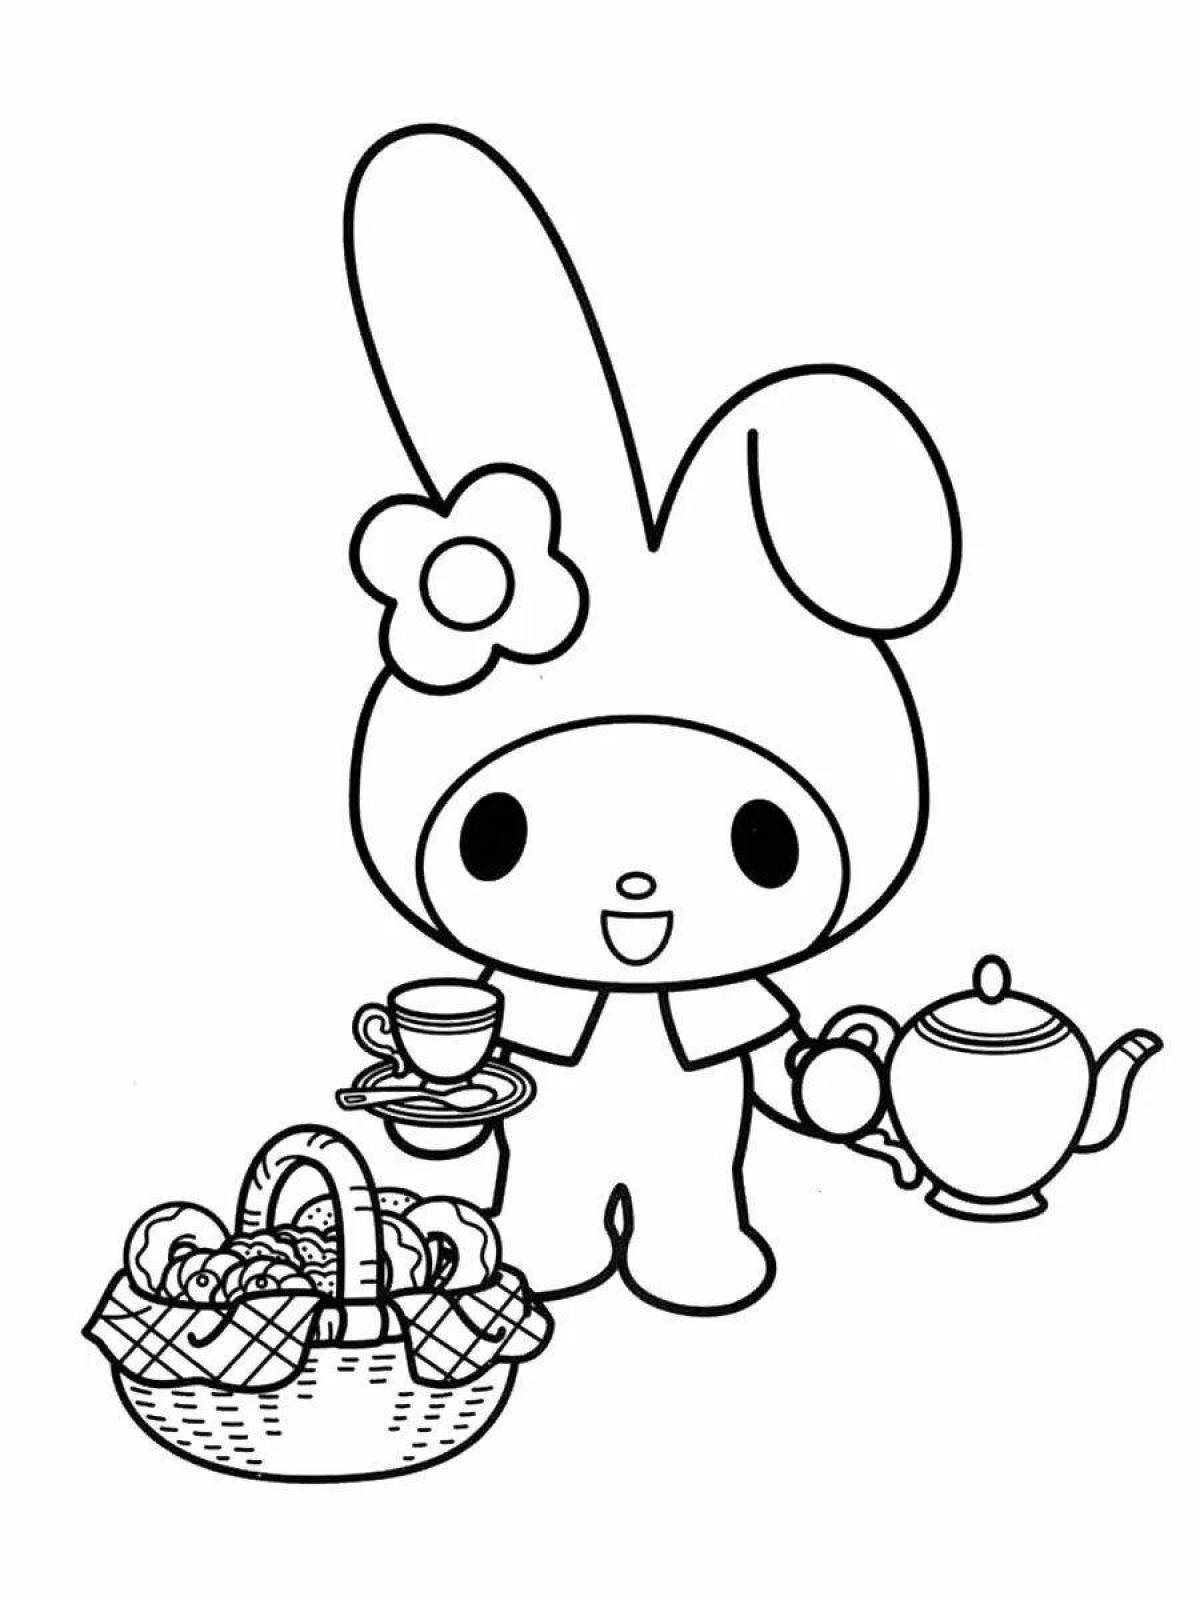 Fancy May melody hello kitty coloring page